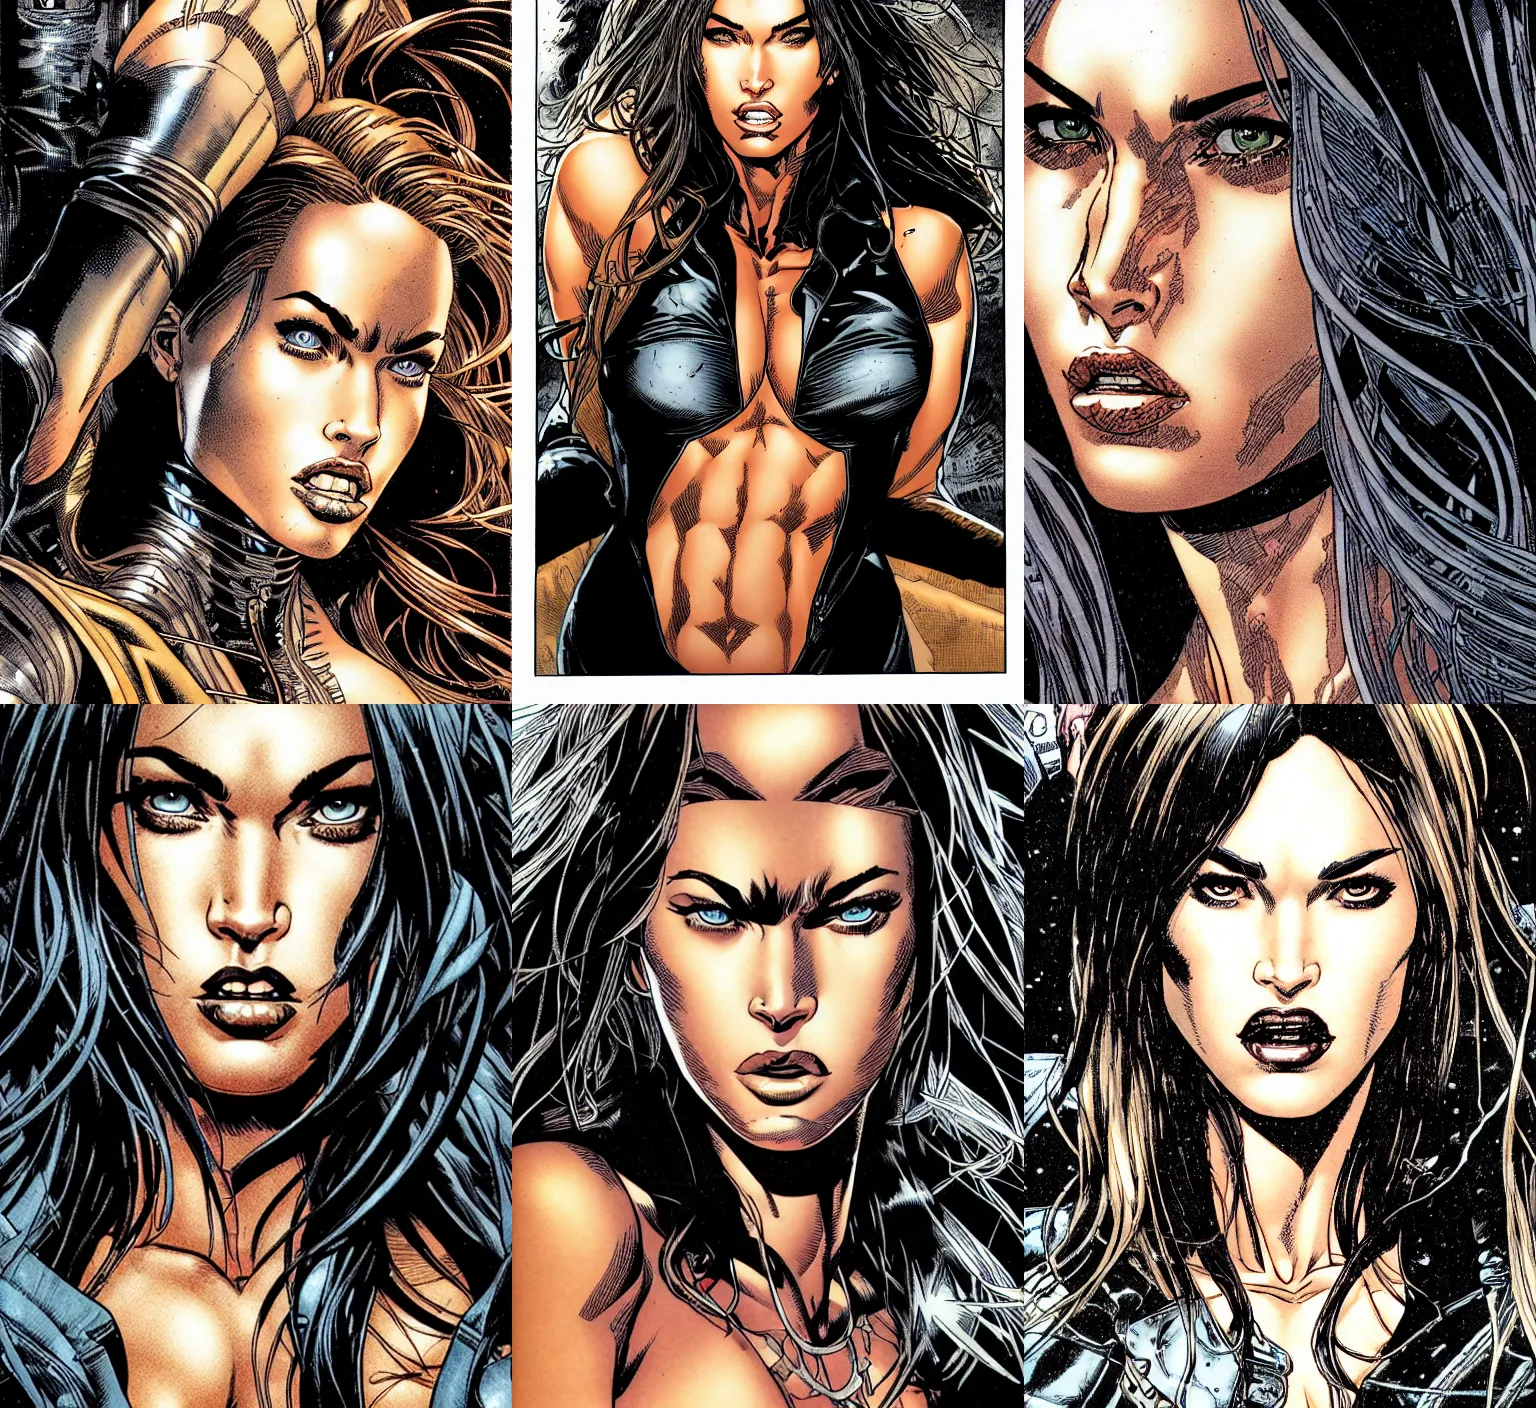 Prompt: portrait close-up of Megan Fox appearing as a character in volume 6 of Metabarons, drawn by Mobius - masterpiece of evocative linework and expressive colours